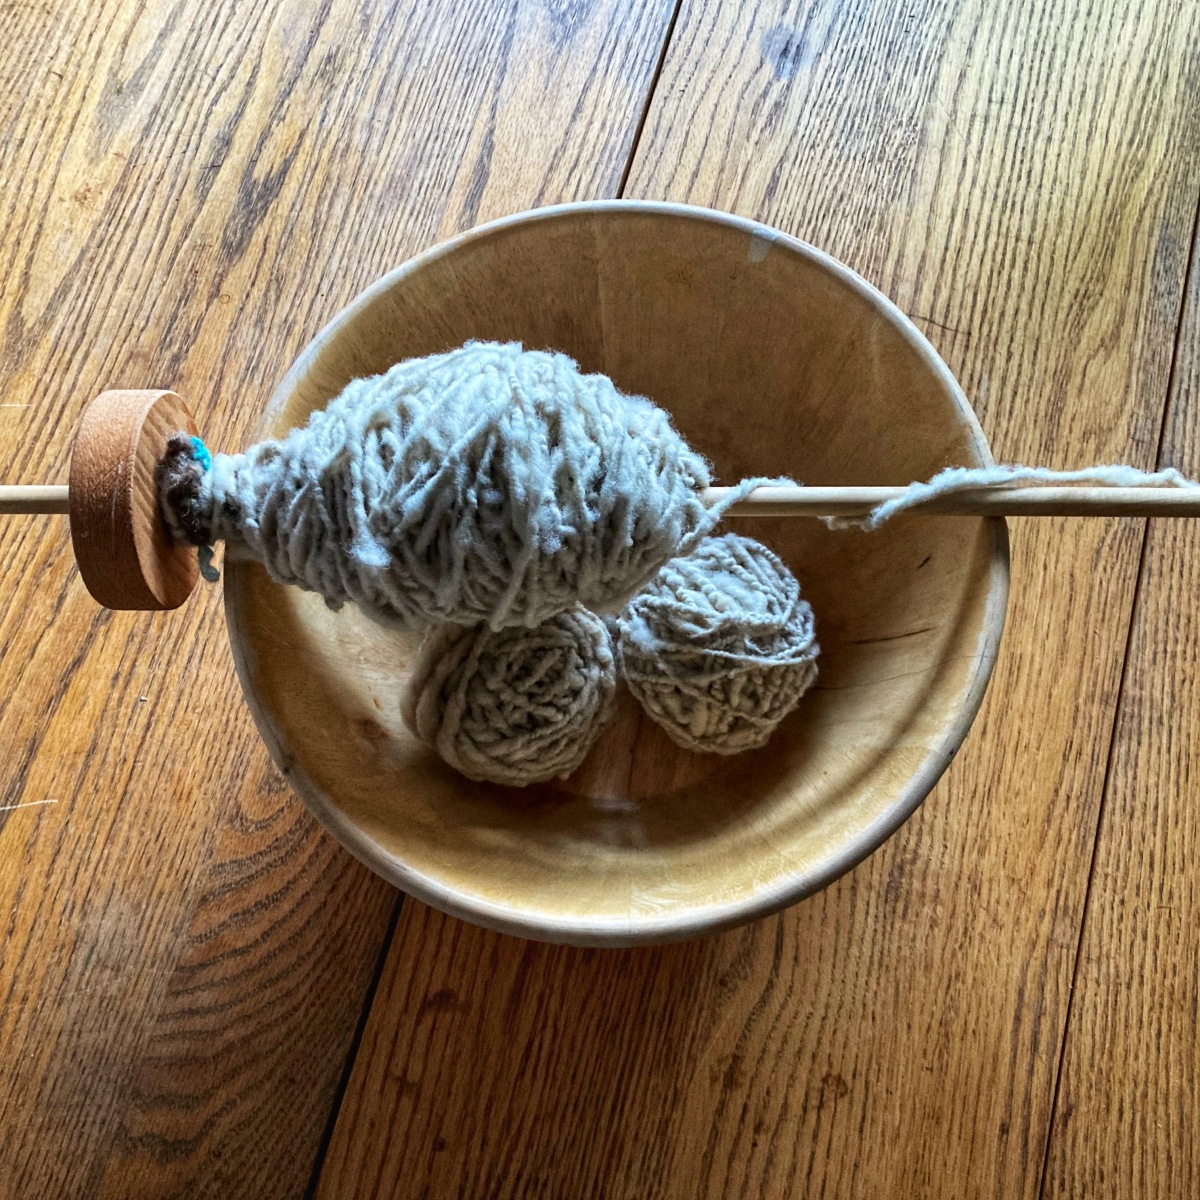 Spinning wool by hand